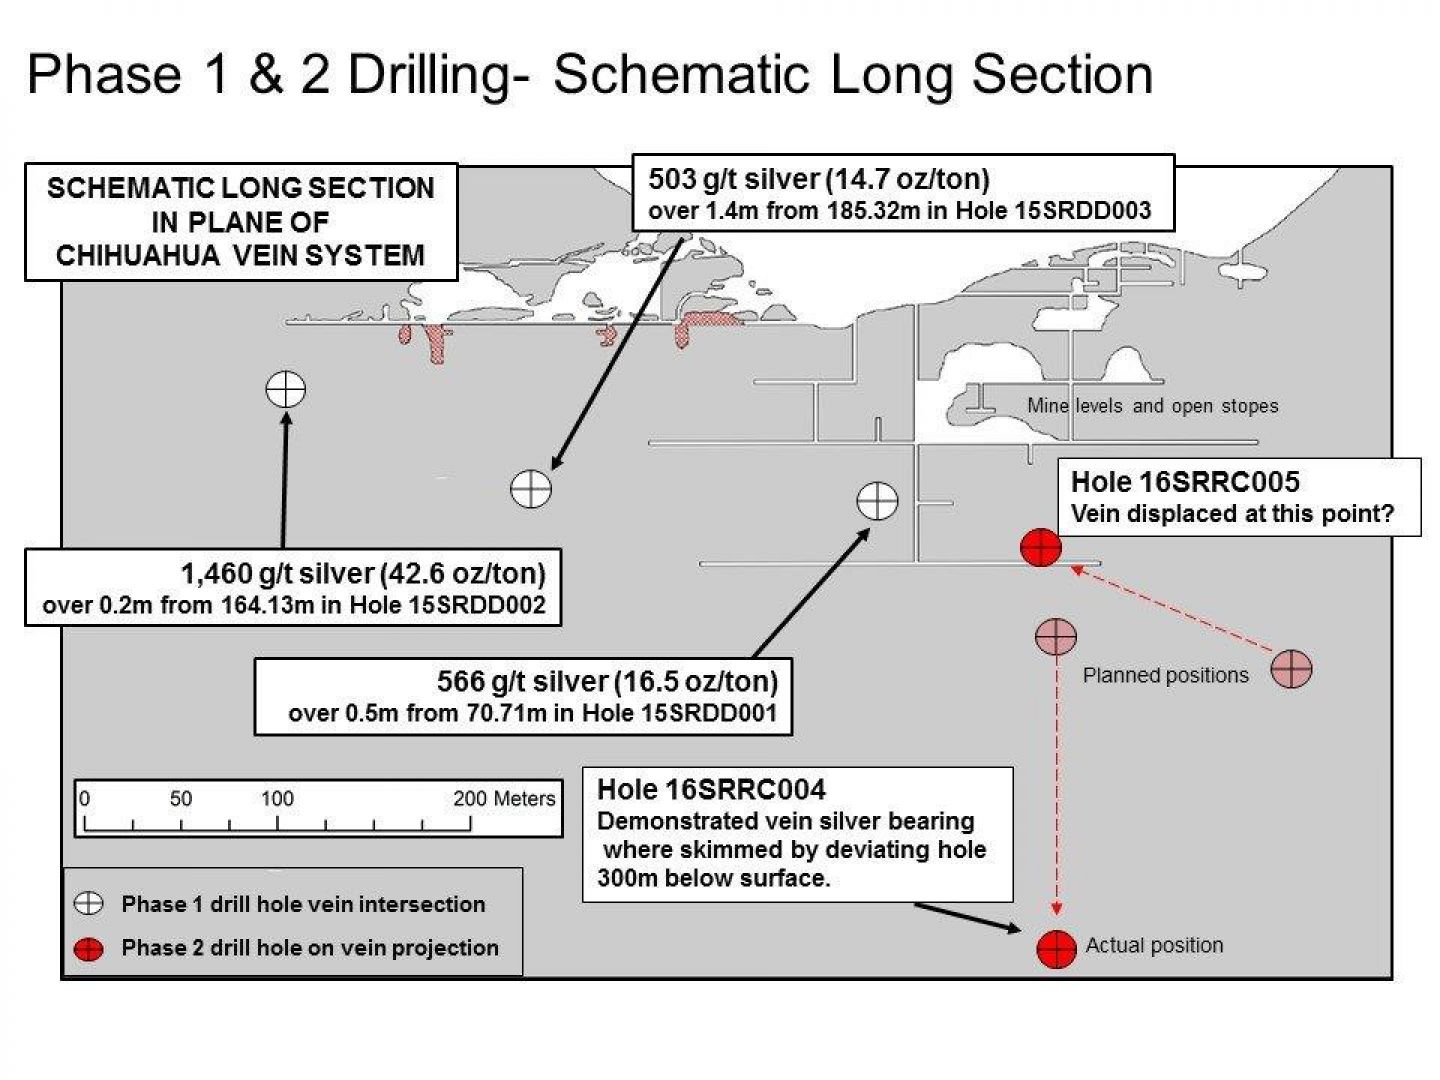 Phase 1 & 2 Drilling - Schematic Long Section